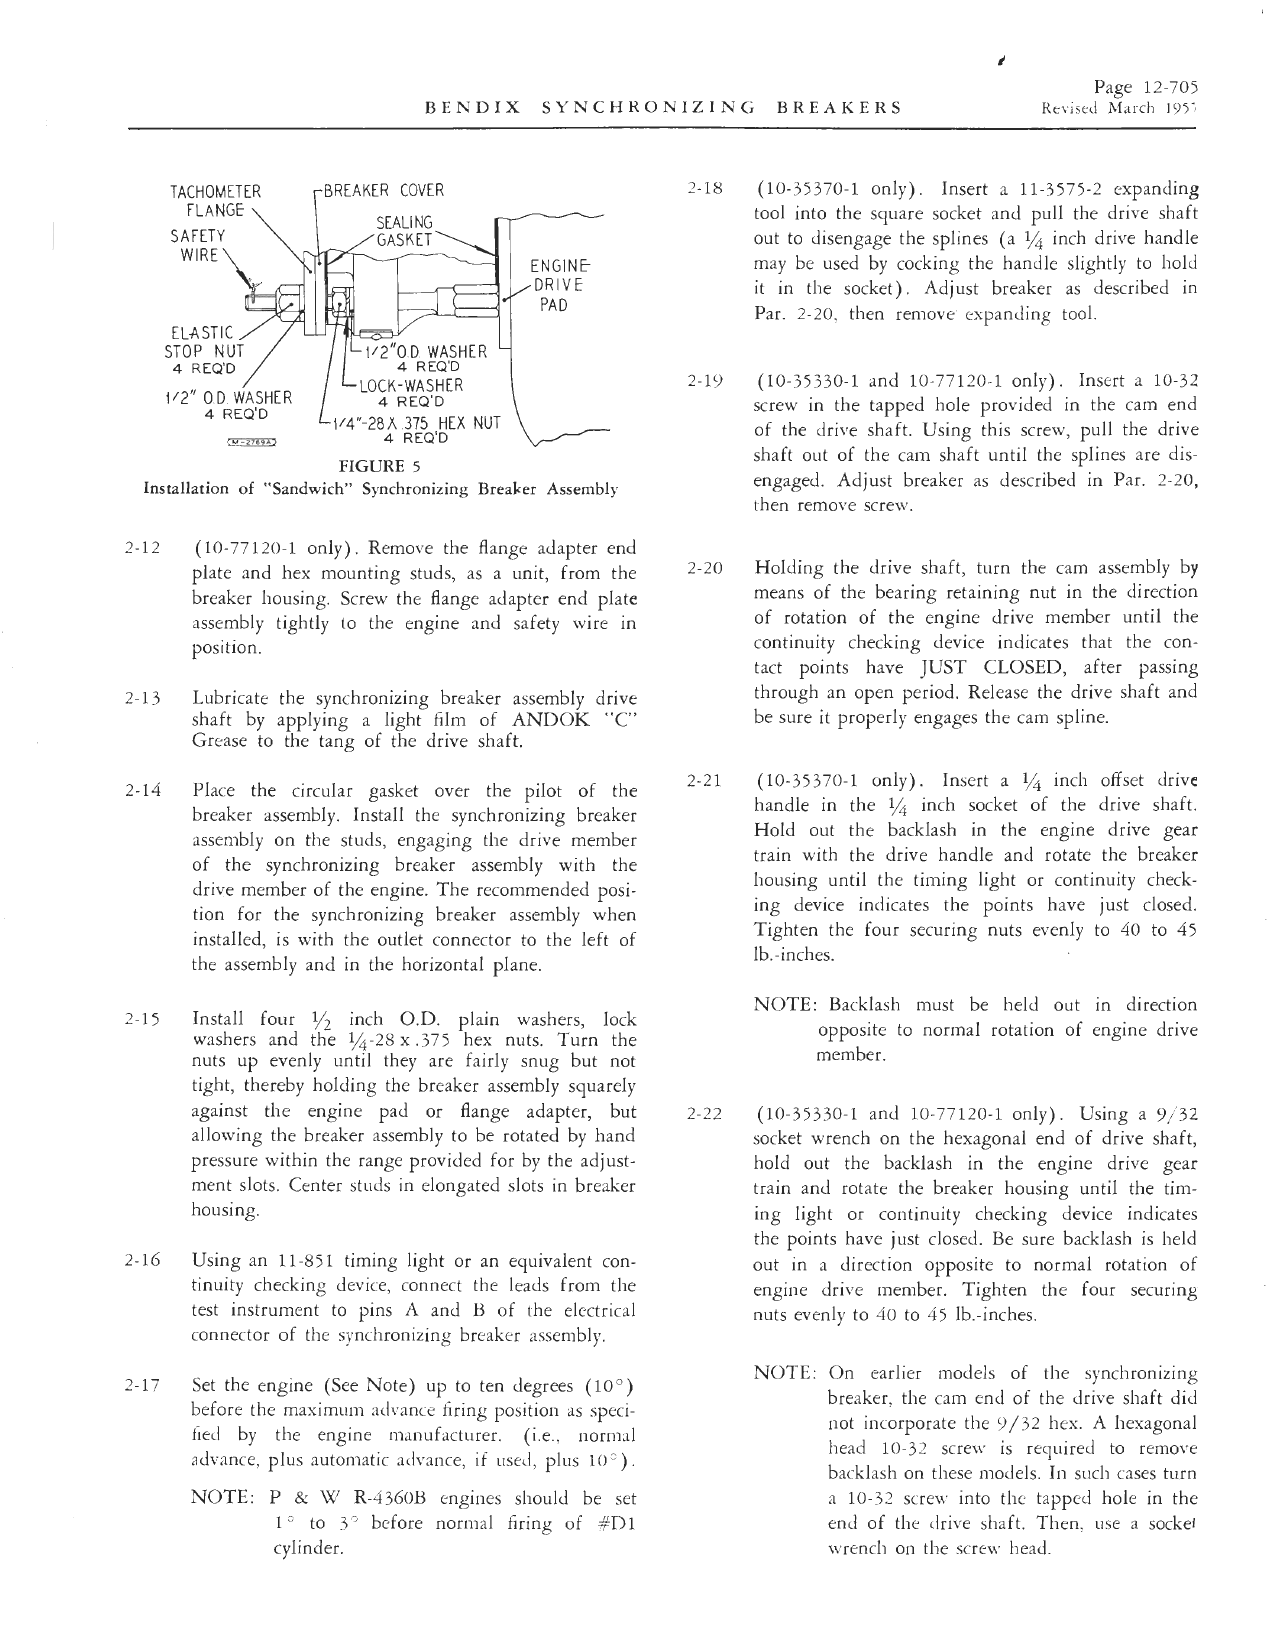 Sample page 5 from AirCorps Library document: Installation, Maintenance and Operation Instructions for Synchronizing Breaker Assembly - 10-35370-1, 10-77120-1, 10-35330-1 thru -5 